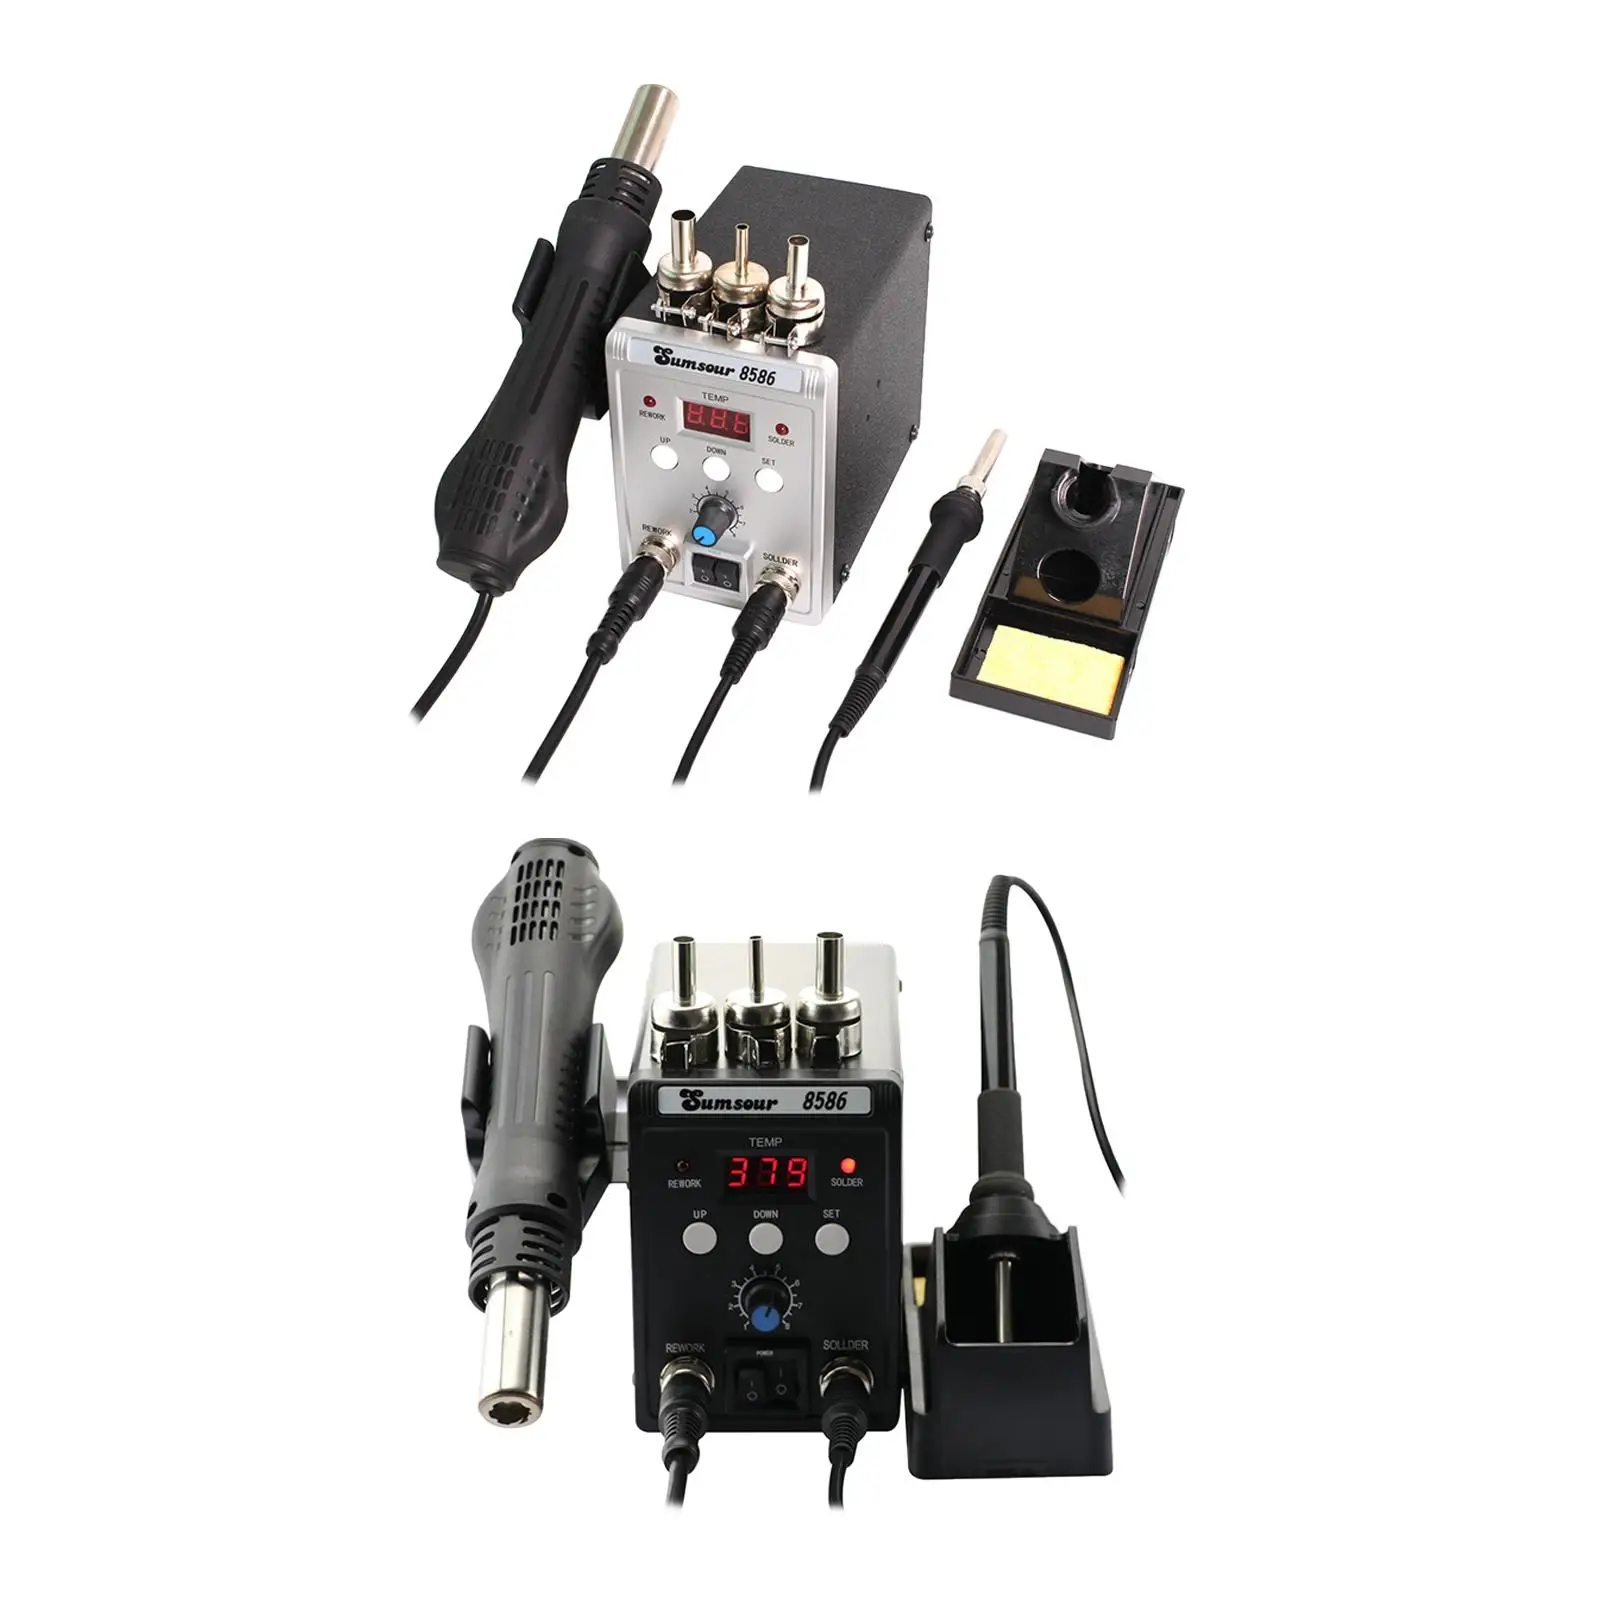 Electric Welding Tool Adjust Temperature Hot Air Rework 60W Soldering Station for Phone Laptop Maintenance Home Appliance